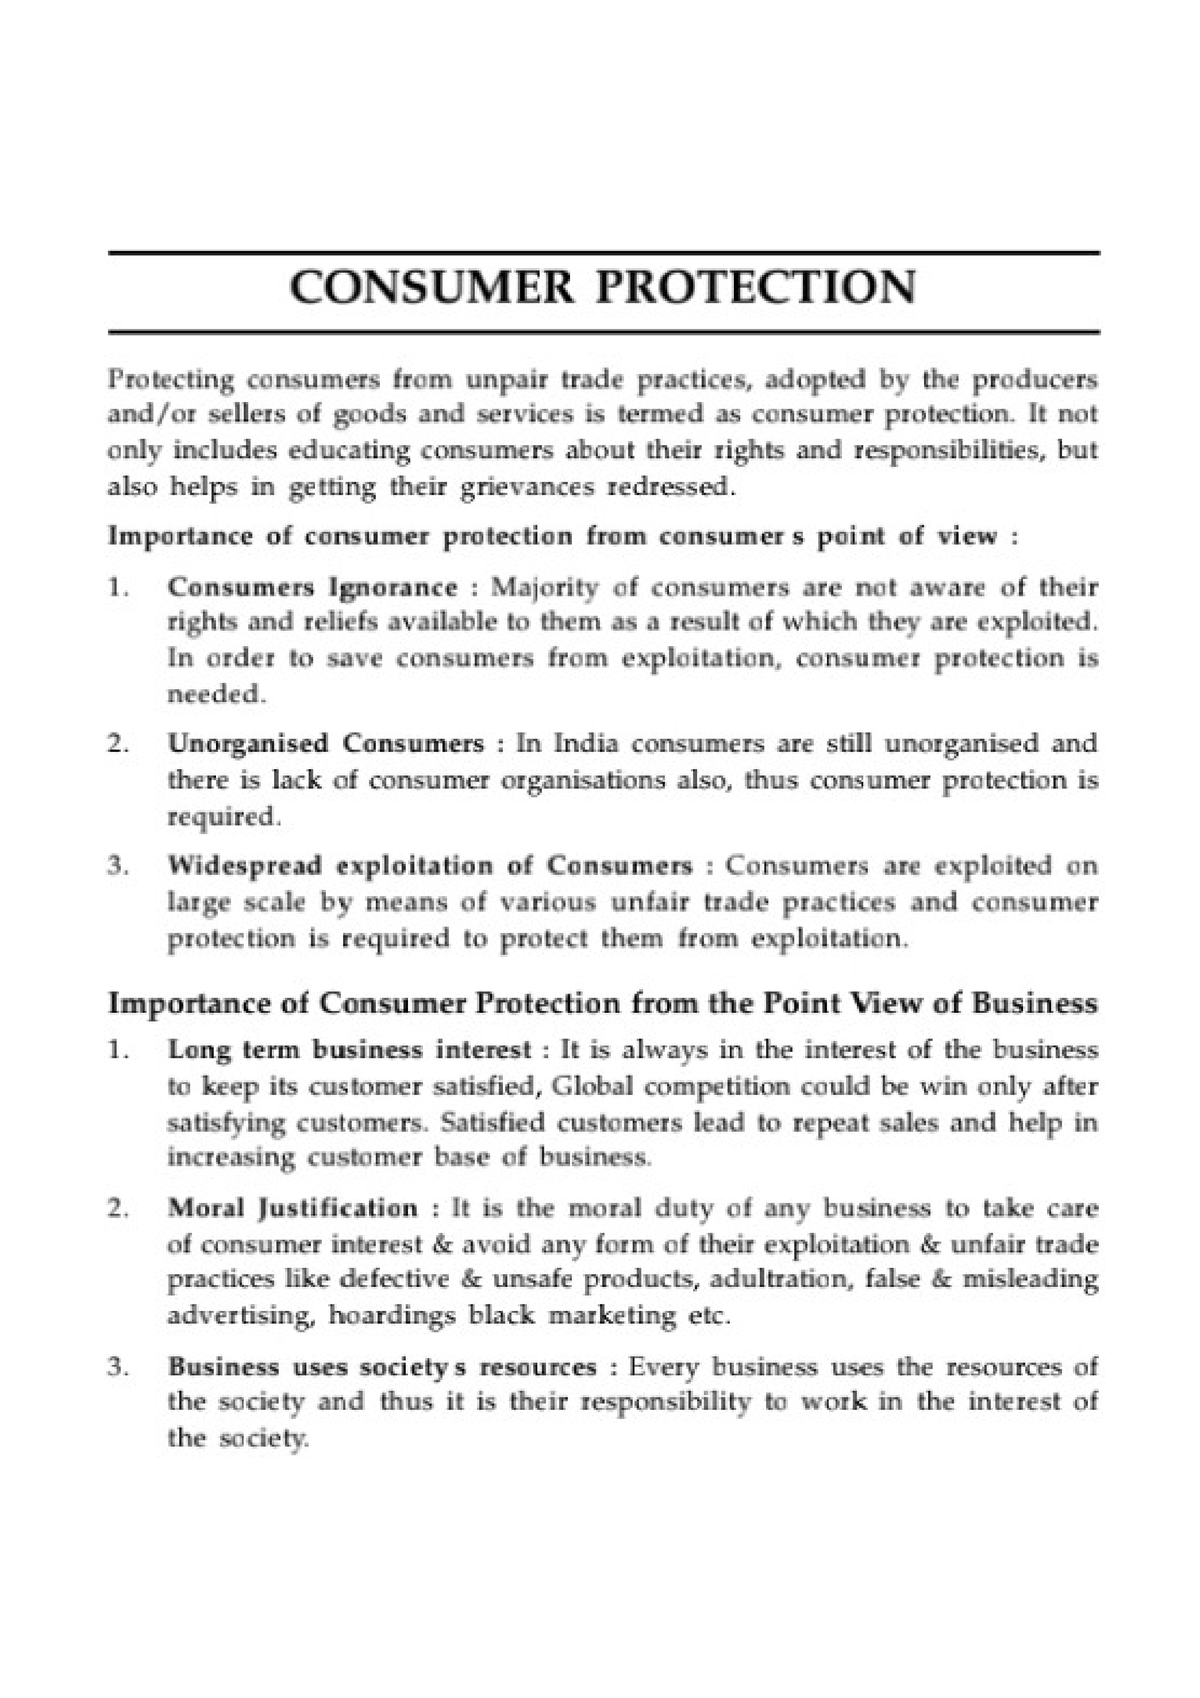 why is consumer protection important essay